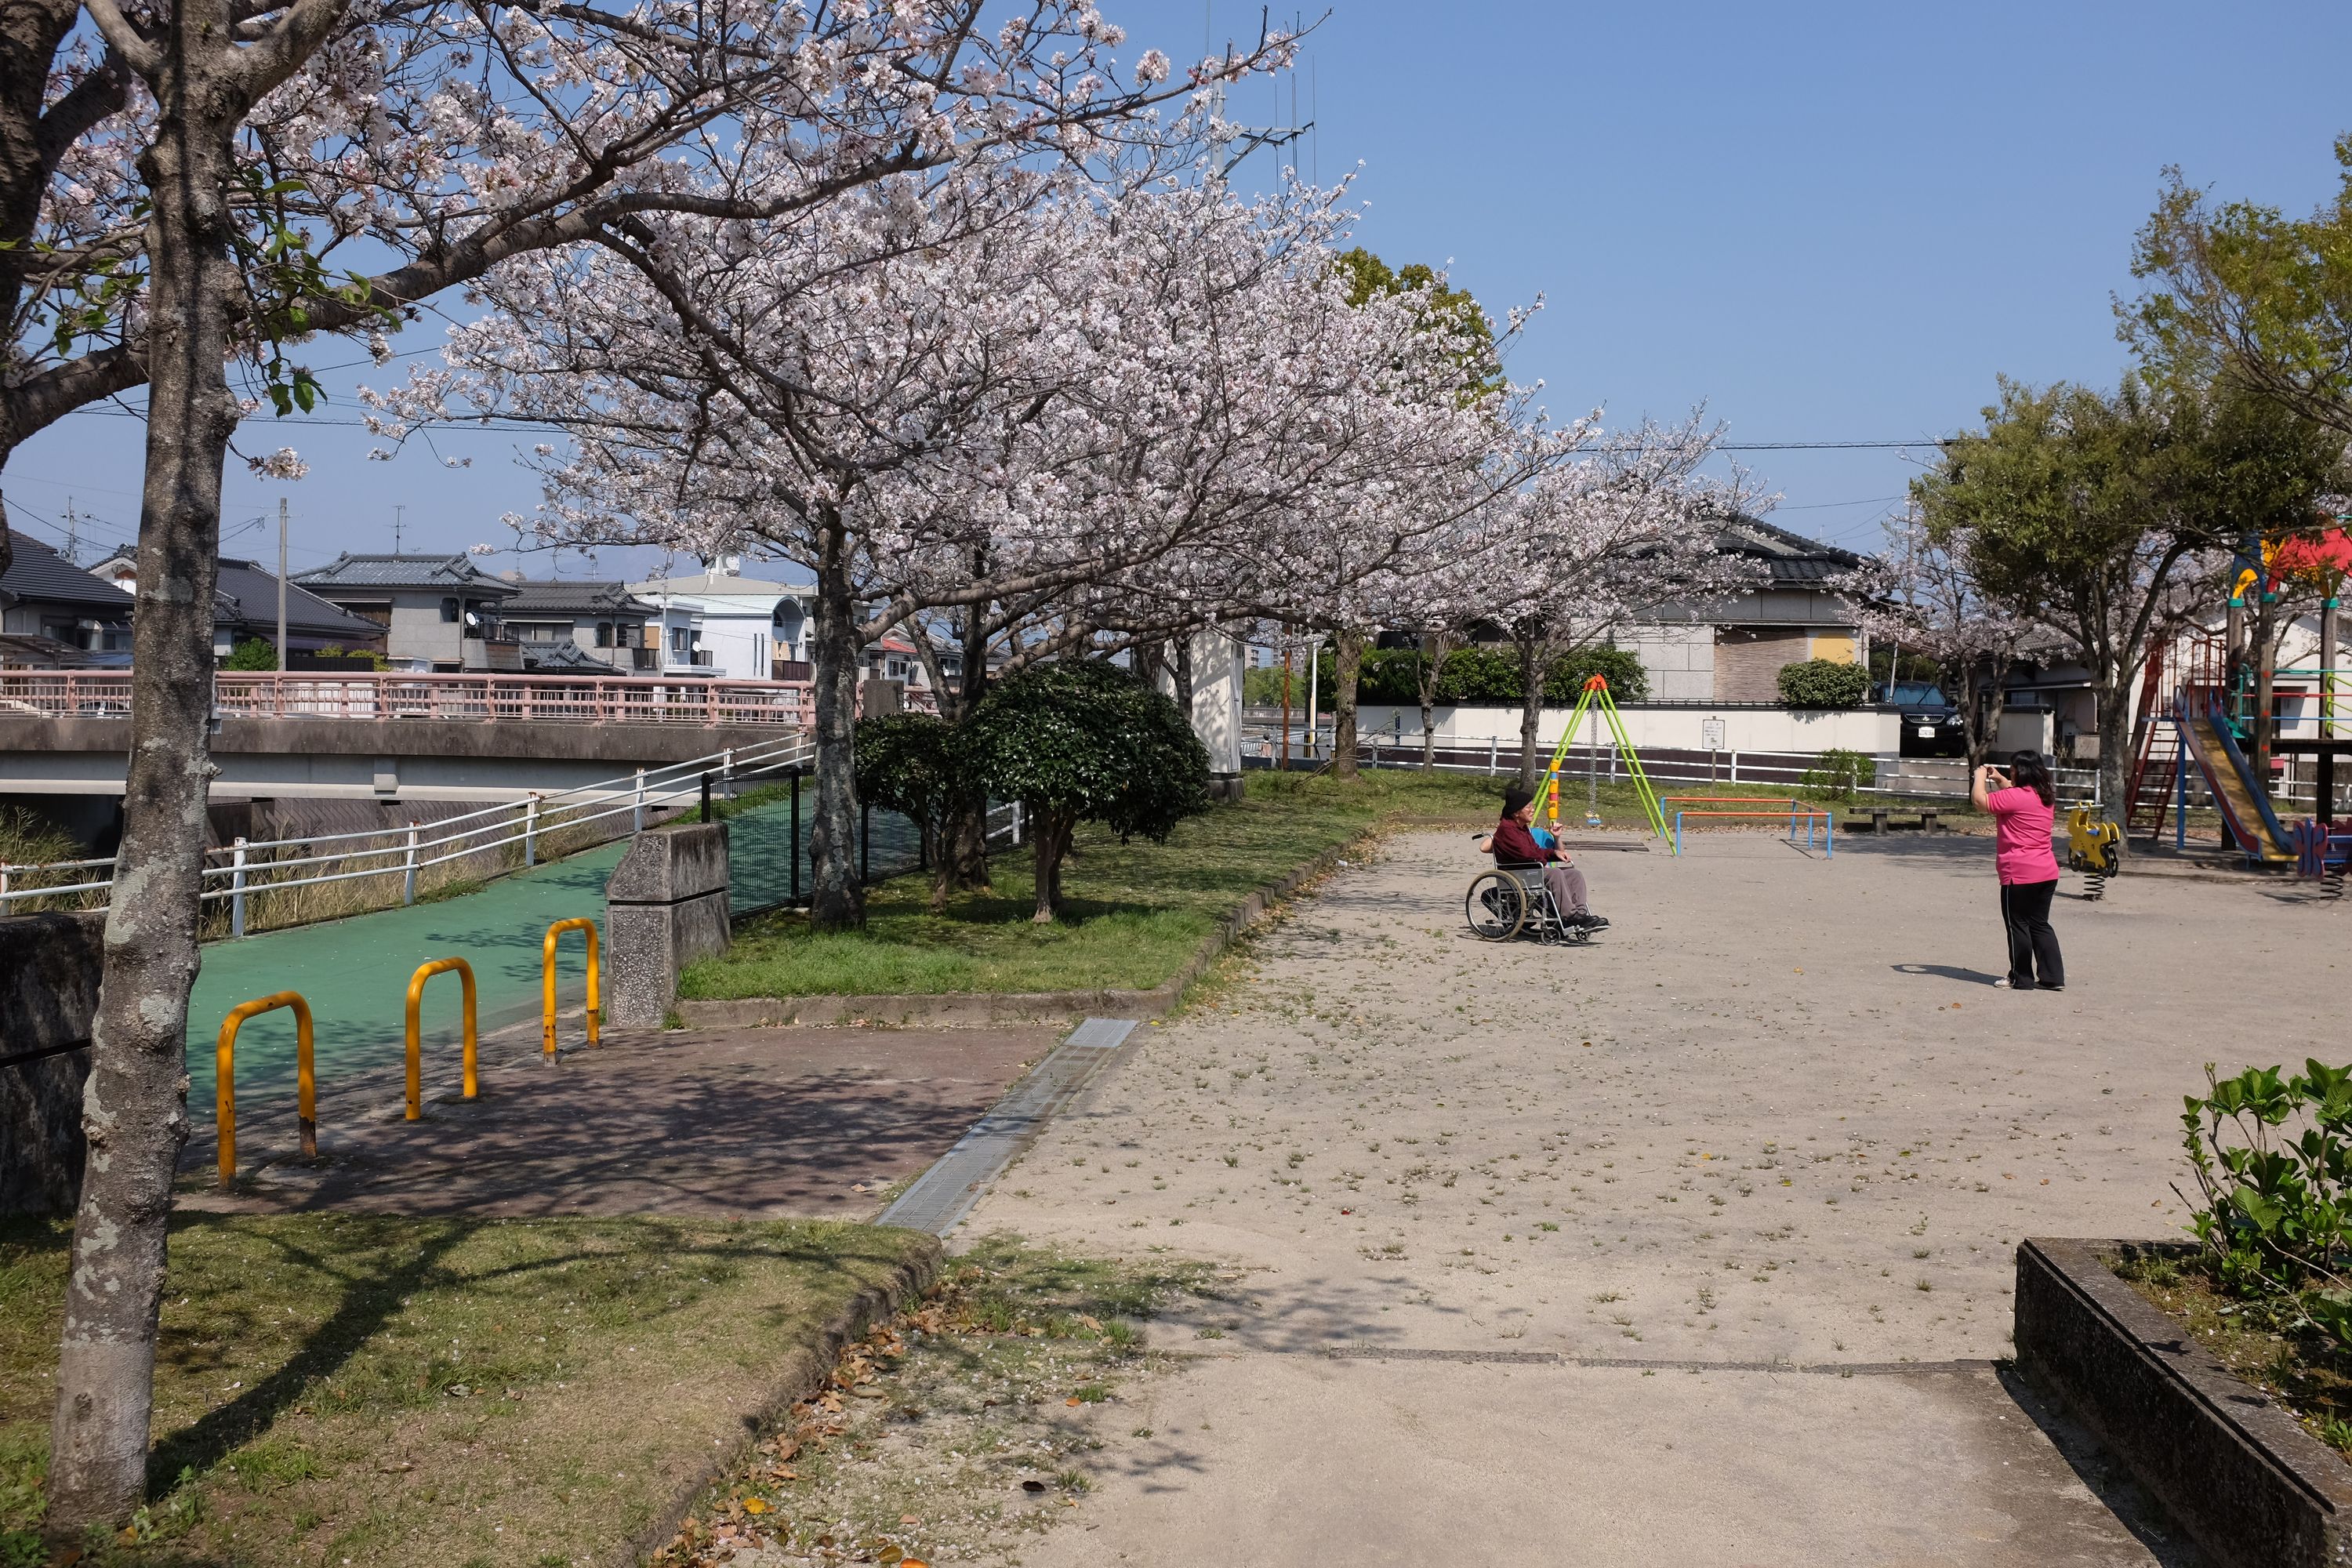 An old man sits in a wheelchair in a park under cherry blossoms.